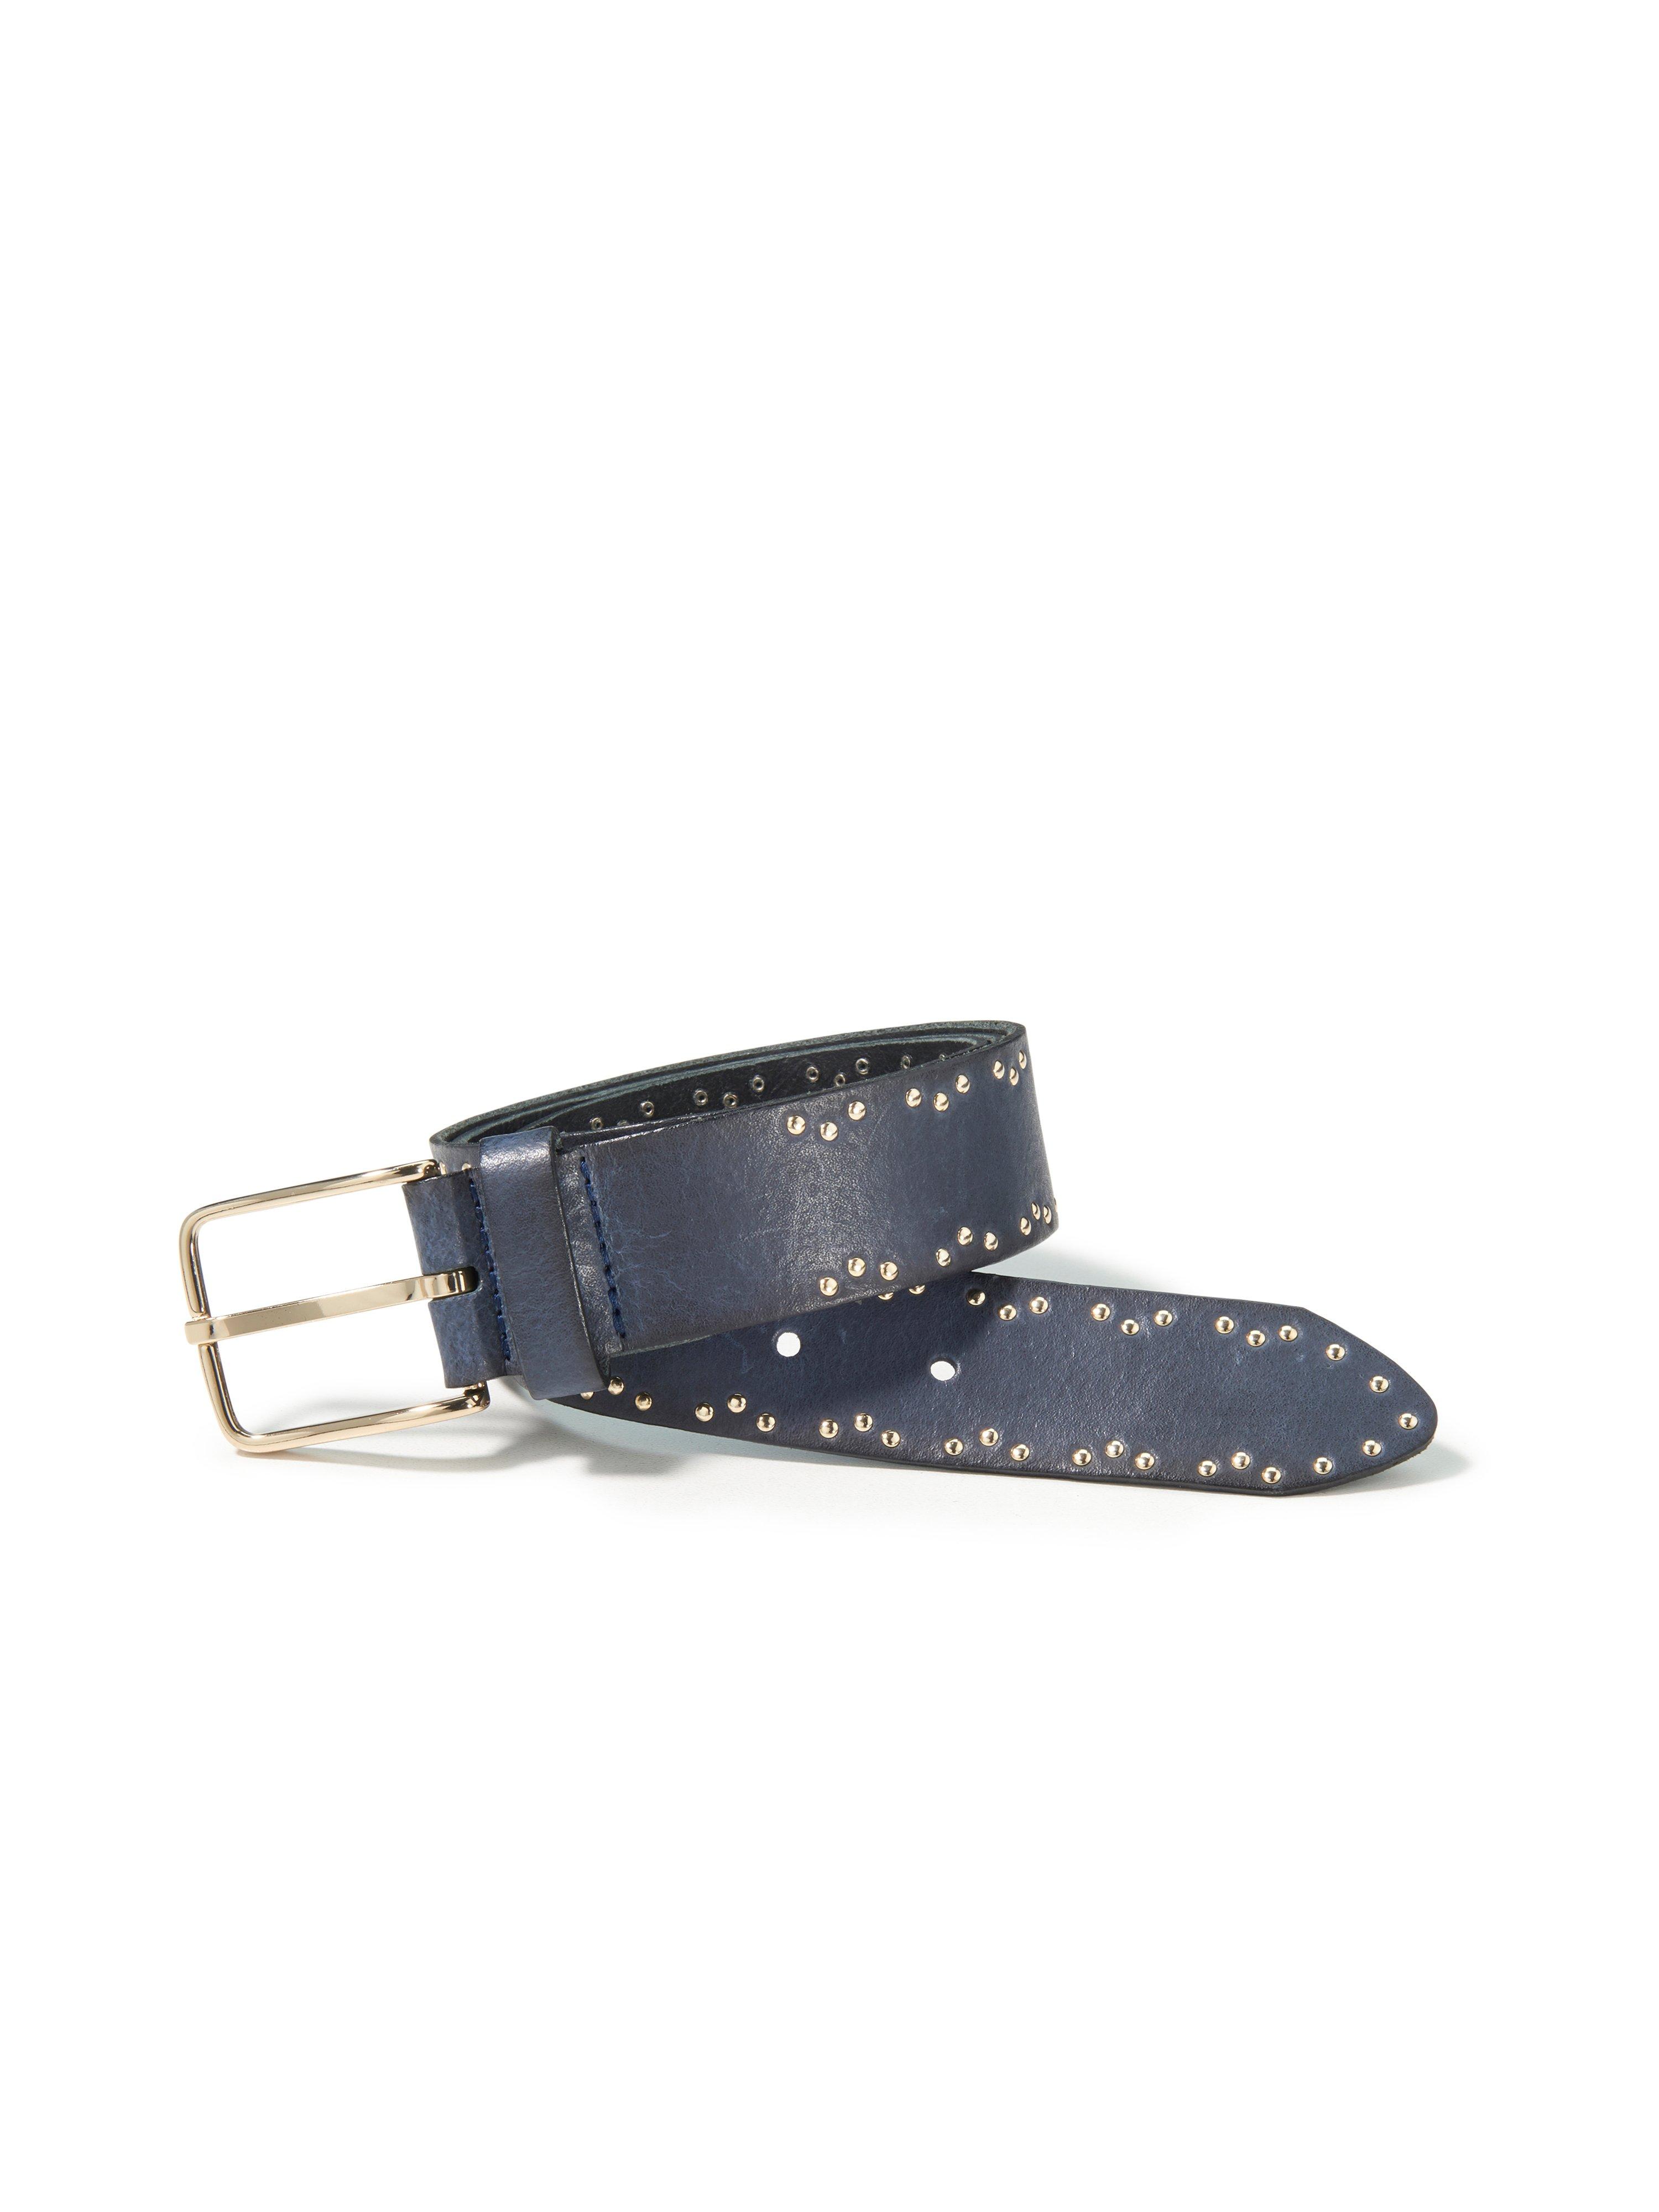 Peter Hahn - Leather belt with gold-coloured clasp - dark blue/gold